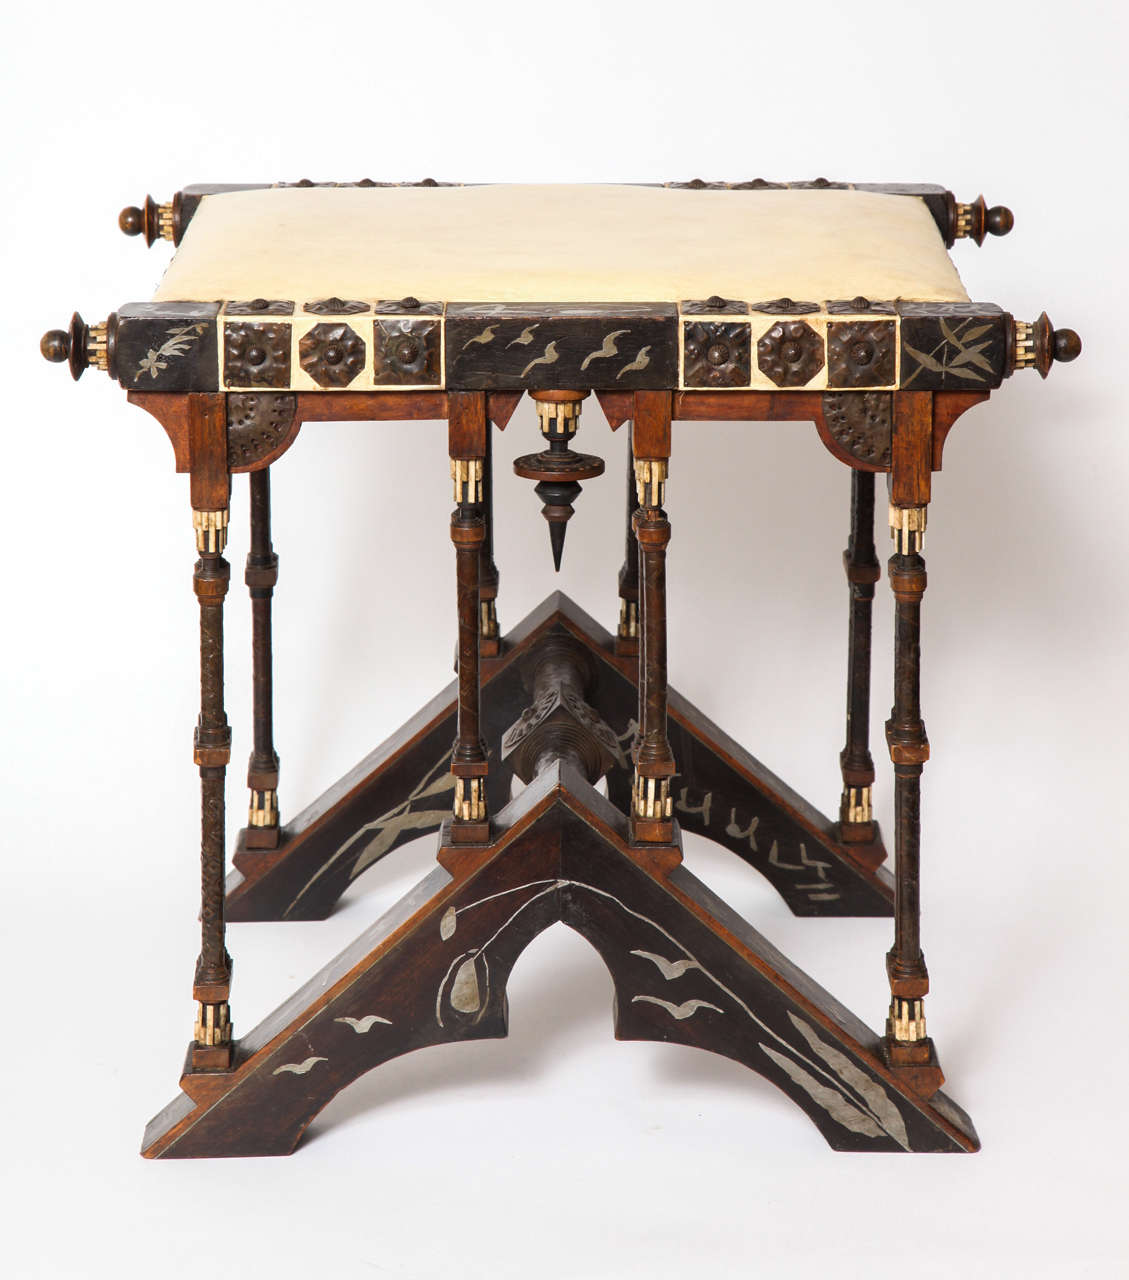 A Carlo Bugatti, Wood, Inlaid Pewter, Hammered Copper, Bone and Leather Stool,made in his Milano Studio, circa 1900